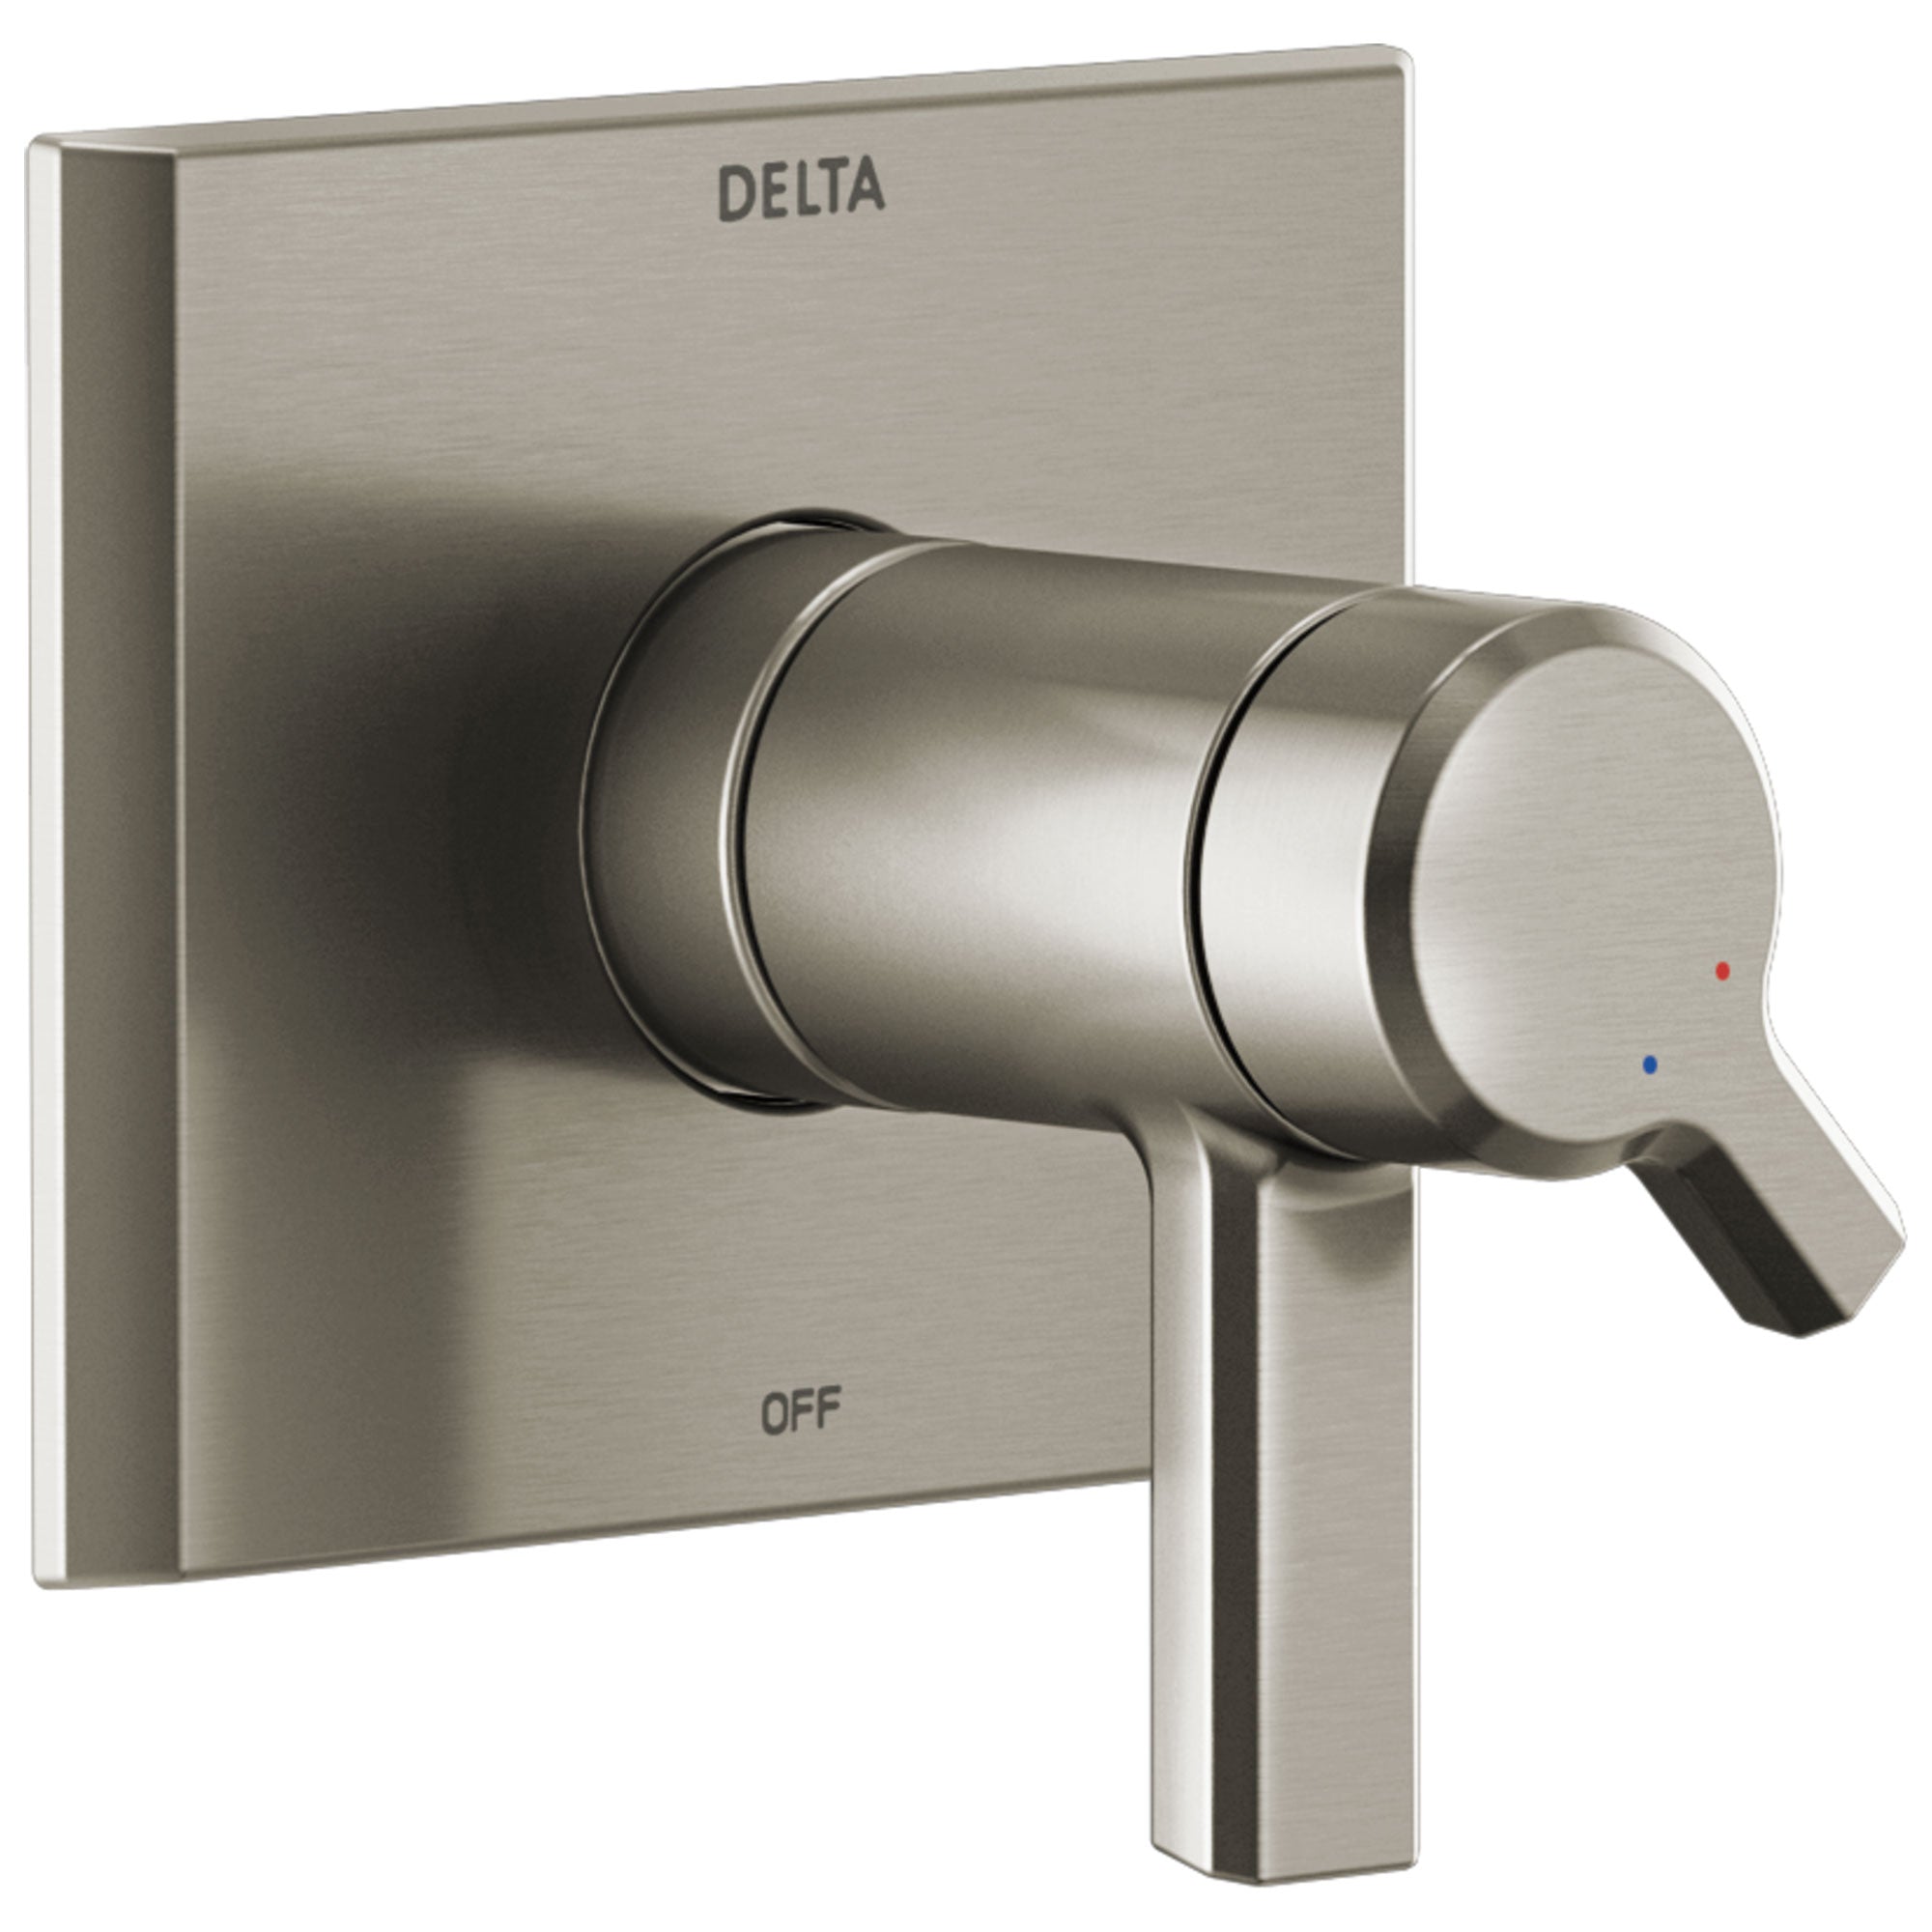 Delta Pivotal Stainless Steel Finish Thermostatic Shower Faucet Dual Handle Control Includes 17T Cartridge, Handles, and Valve without Stops D3301V